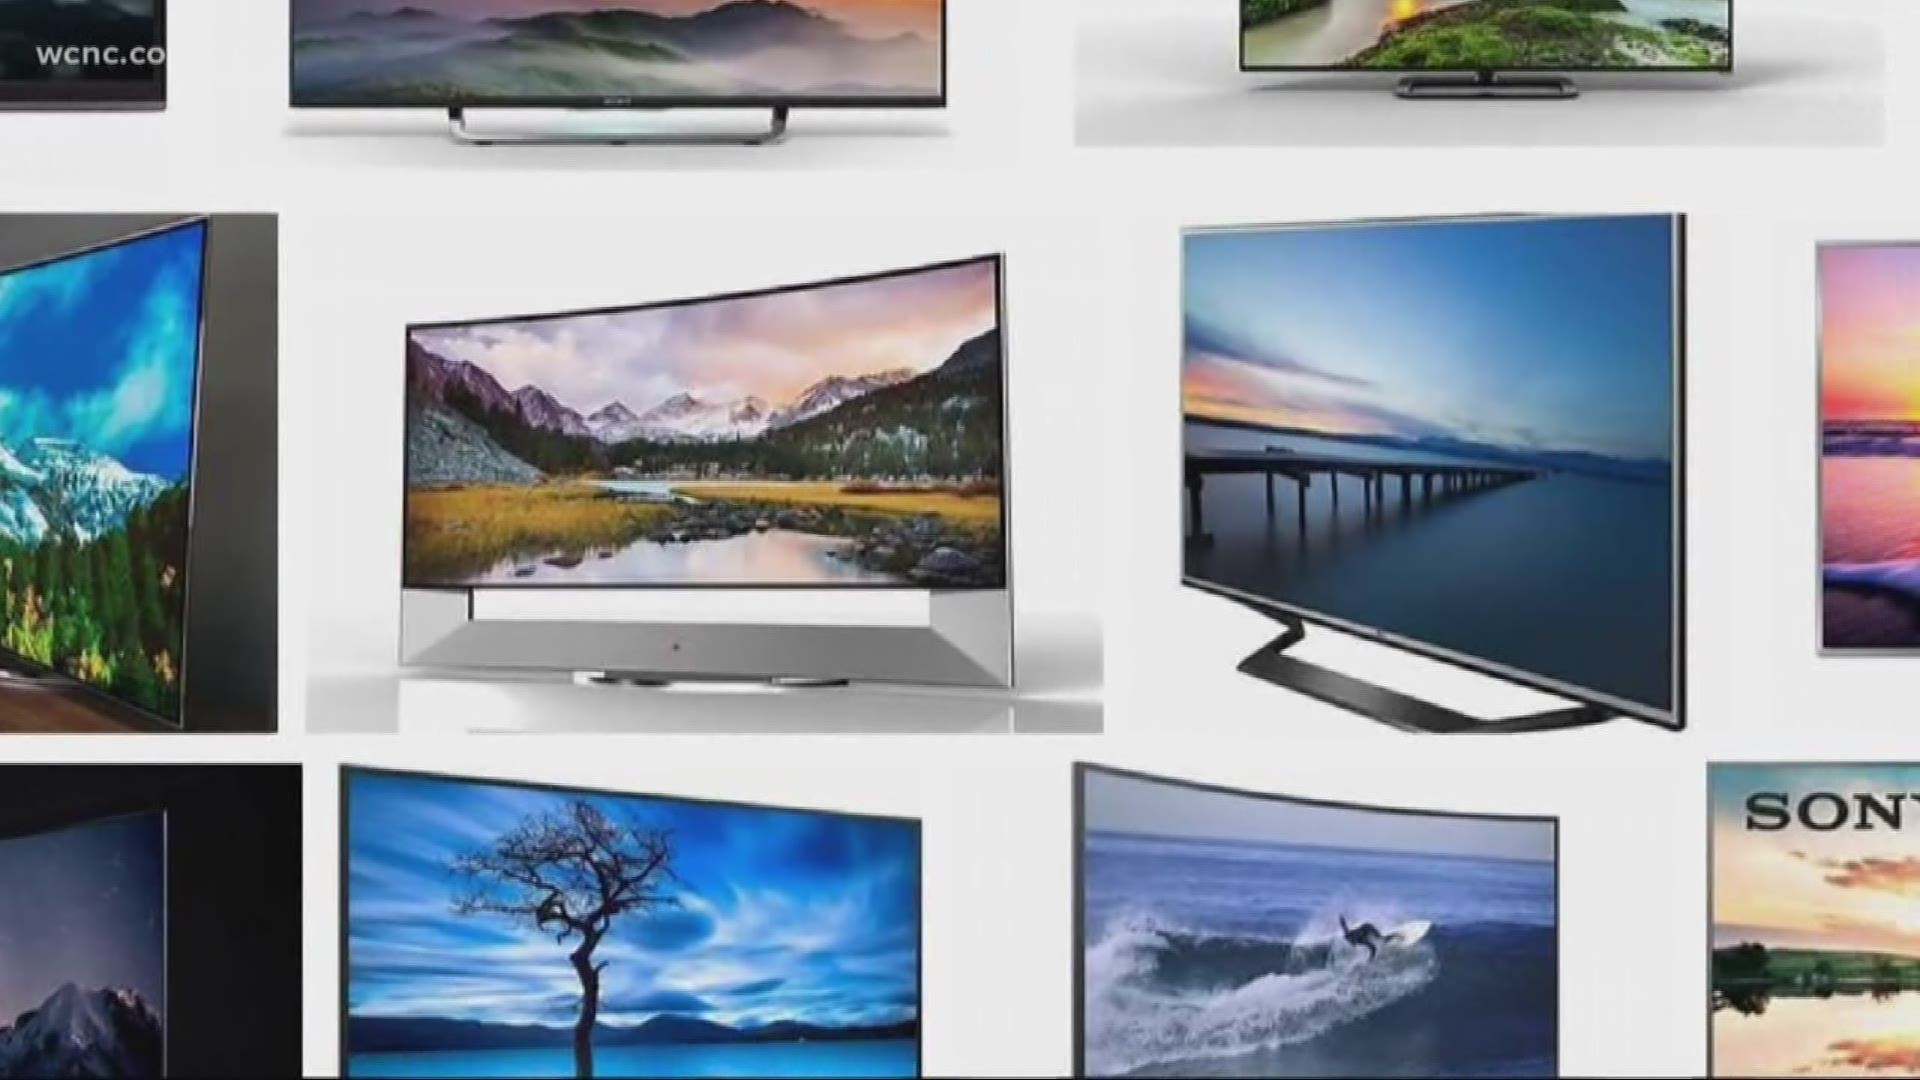 TV sales in particular are expected to include large sales on a variety of sizes and qualities.